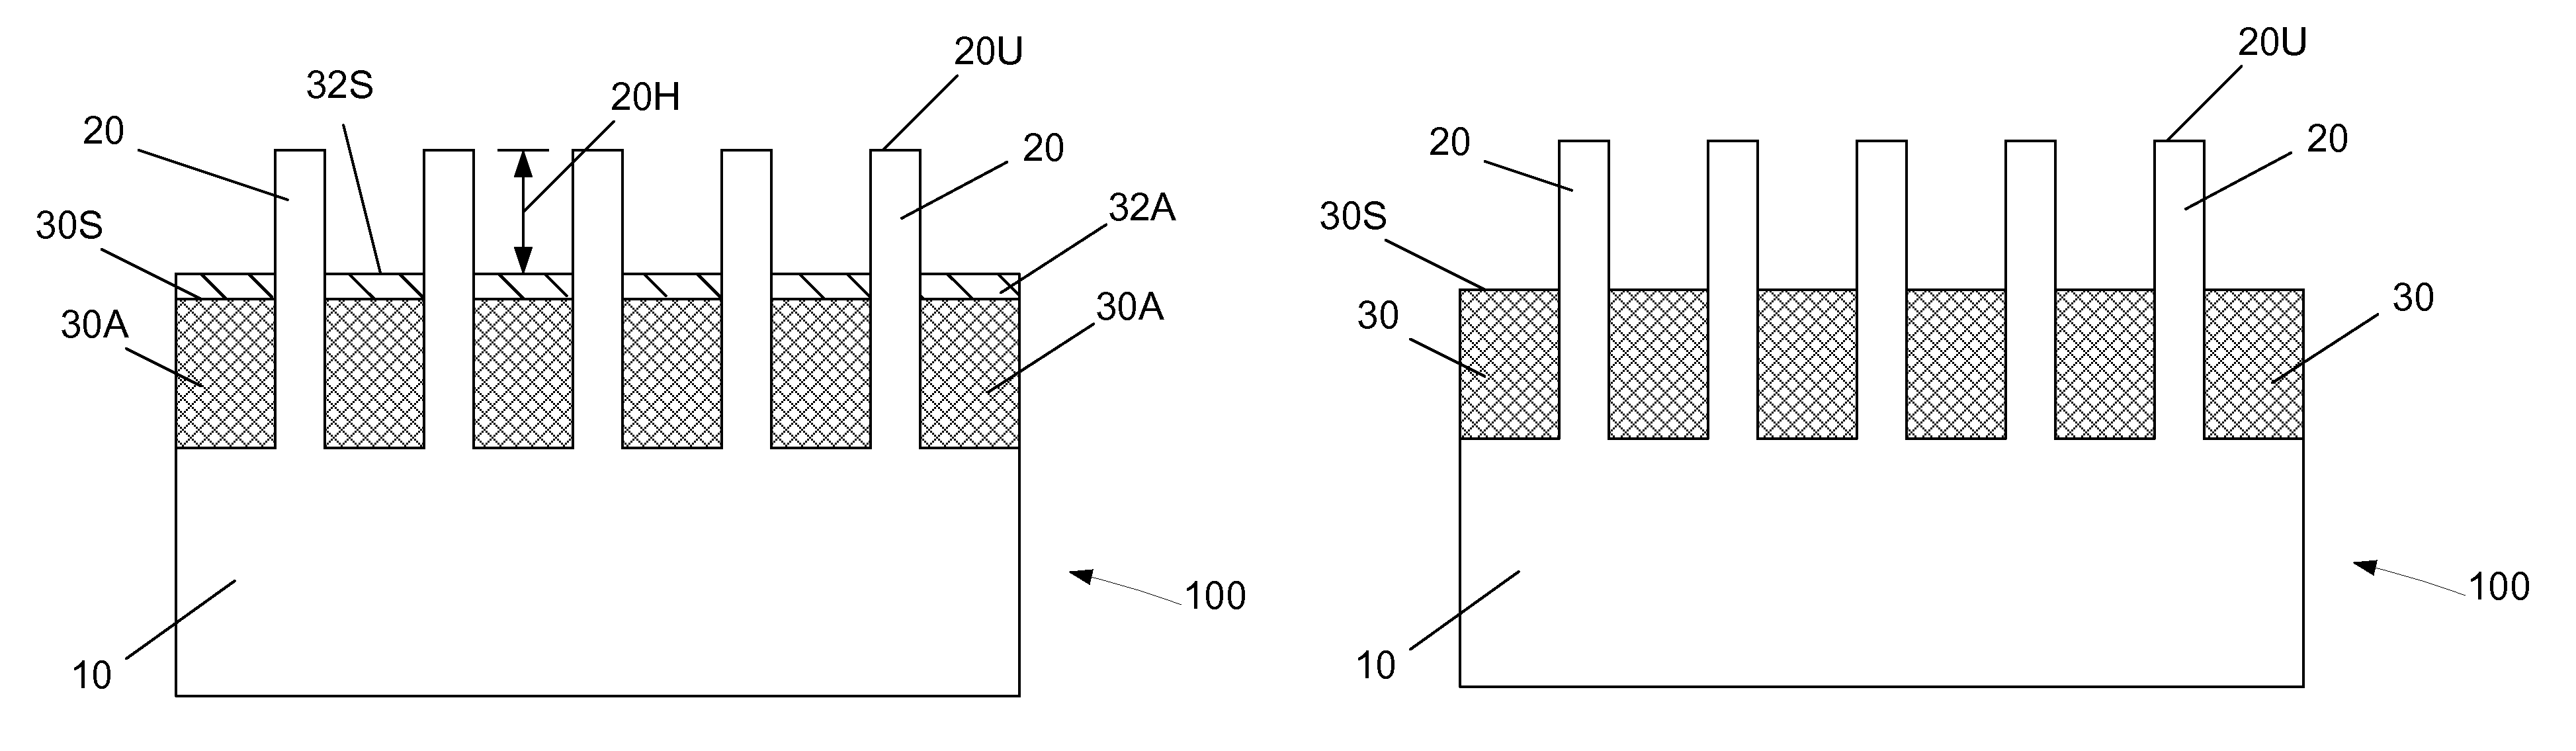 Methods of controlling fin height of FinFET devices by performing a directional deposition process